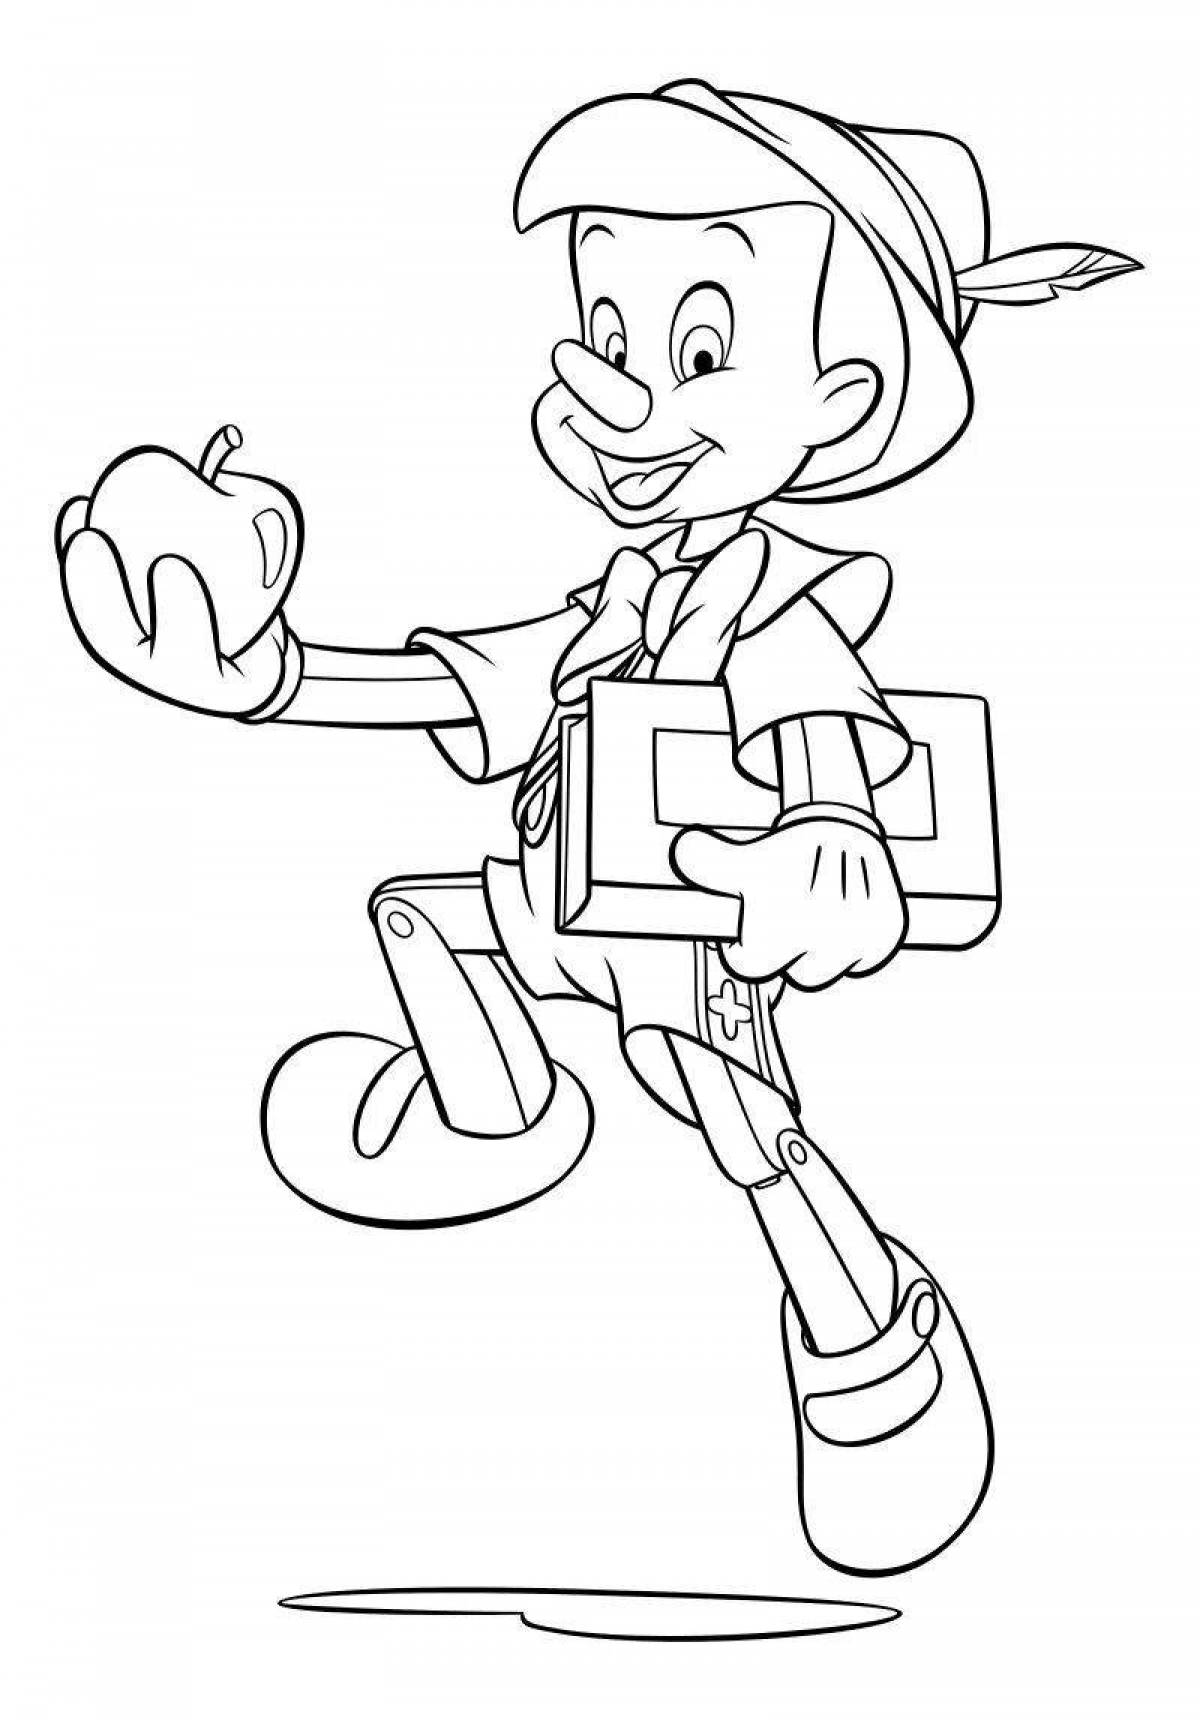 Pinocchio coloring pages with crazy color for kids